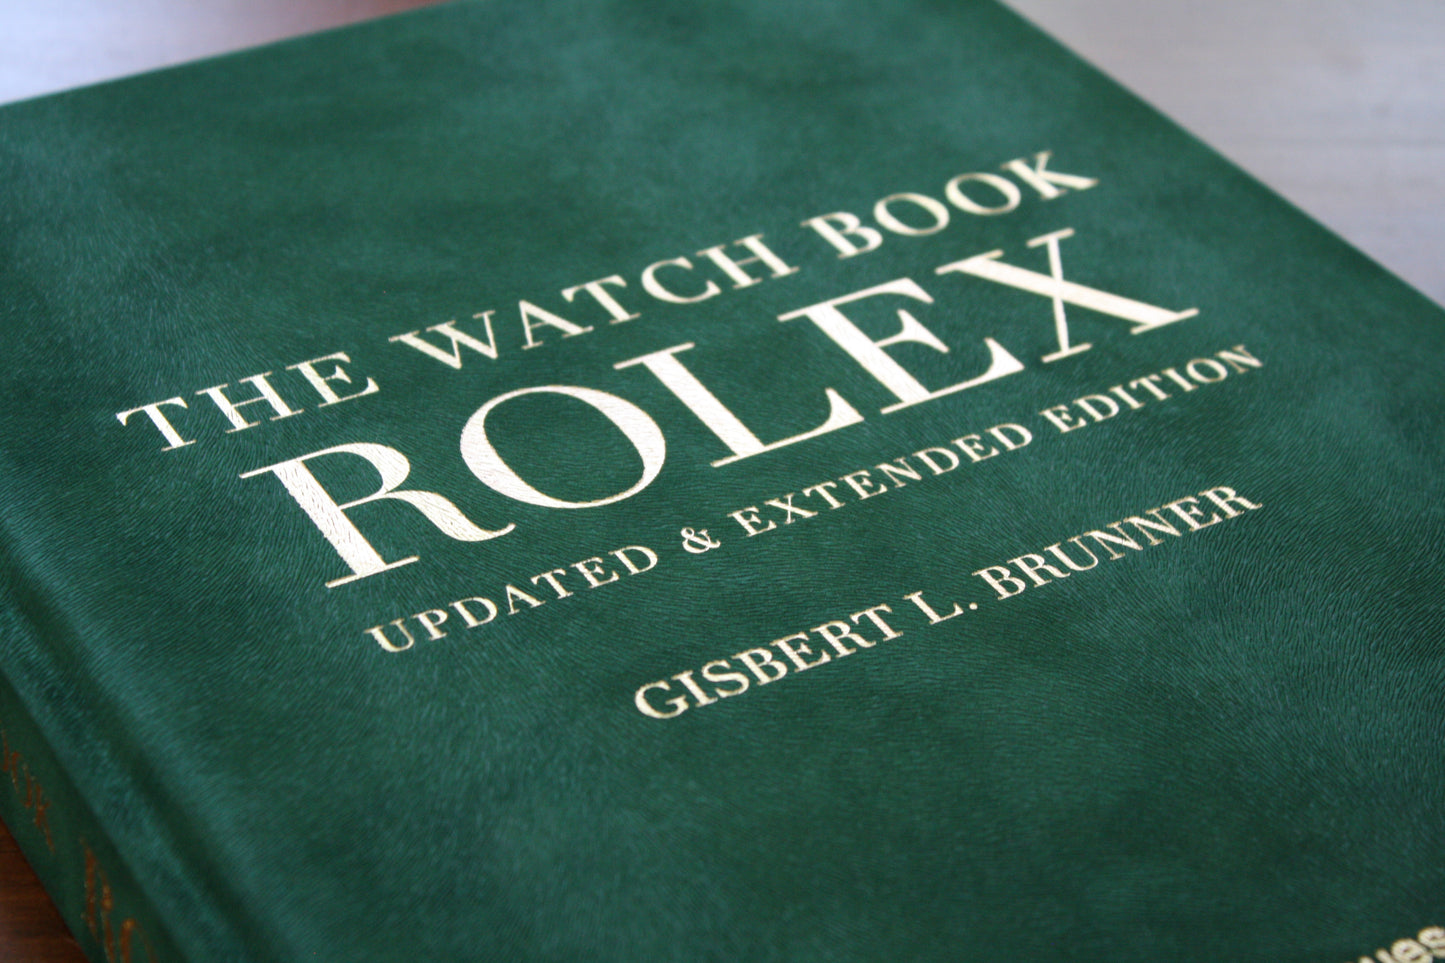 The watch book Rolex : Updated & Extended Edition